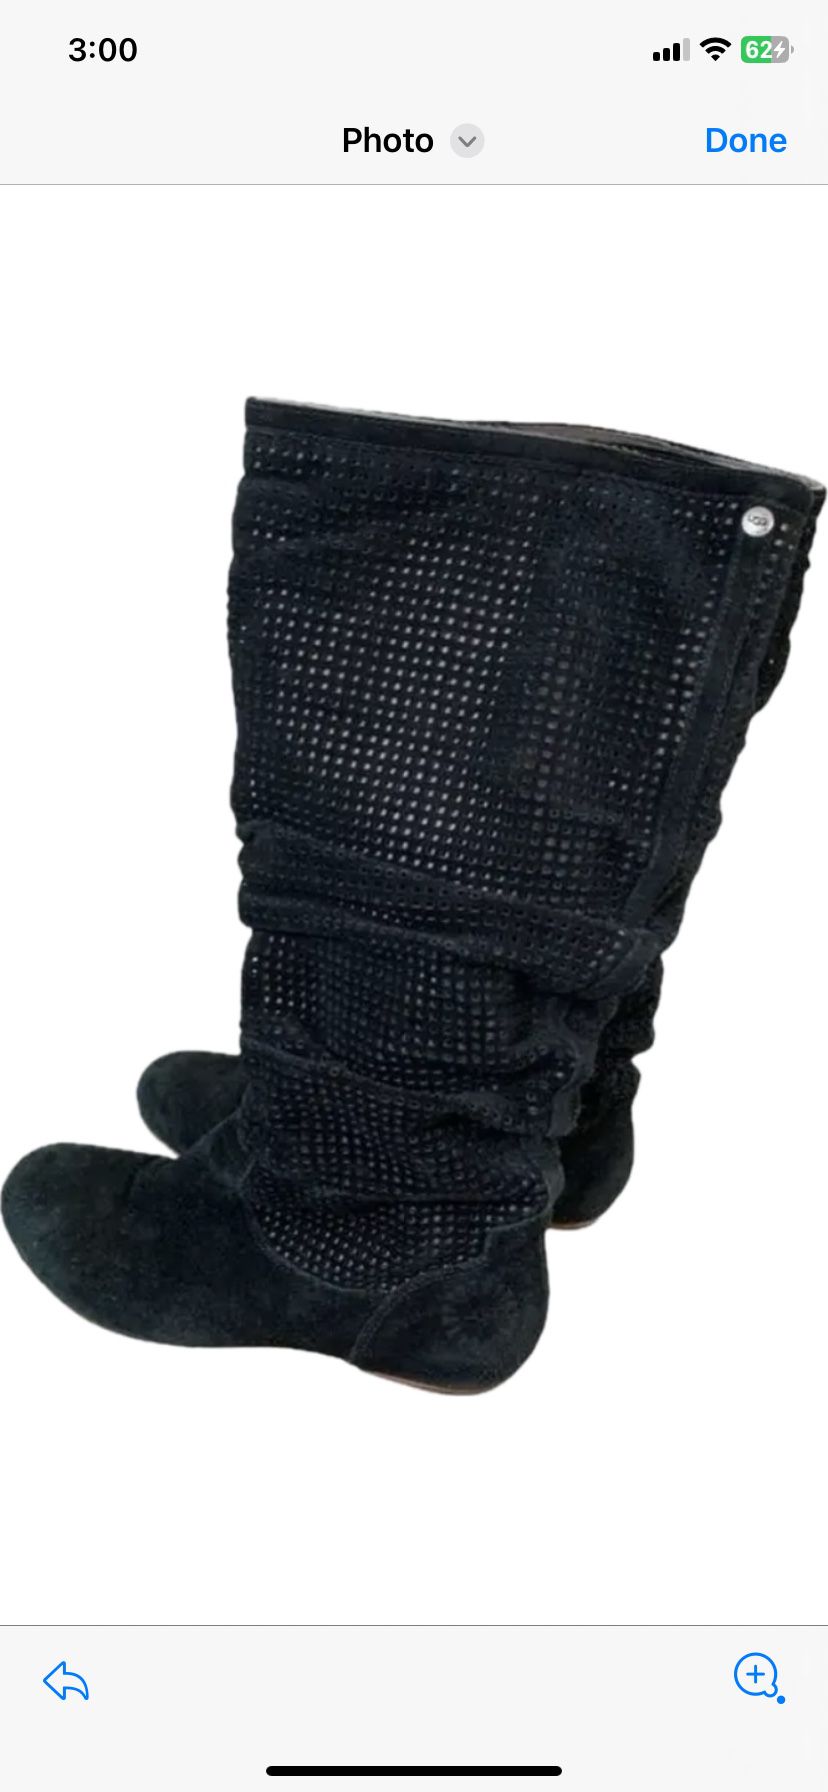 UGG 'Abilene' Black Leather Perforated Slouchy Boots, 8.5